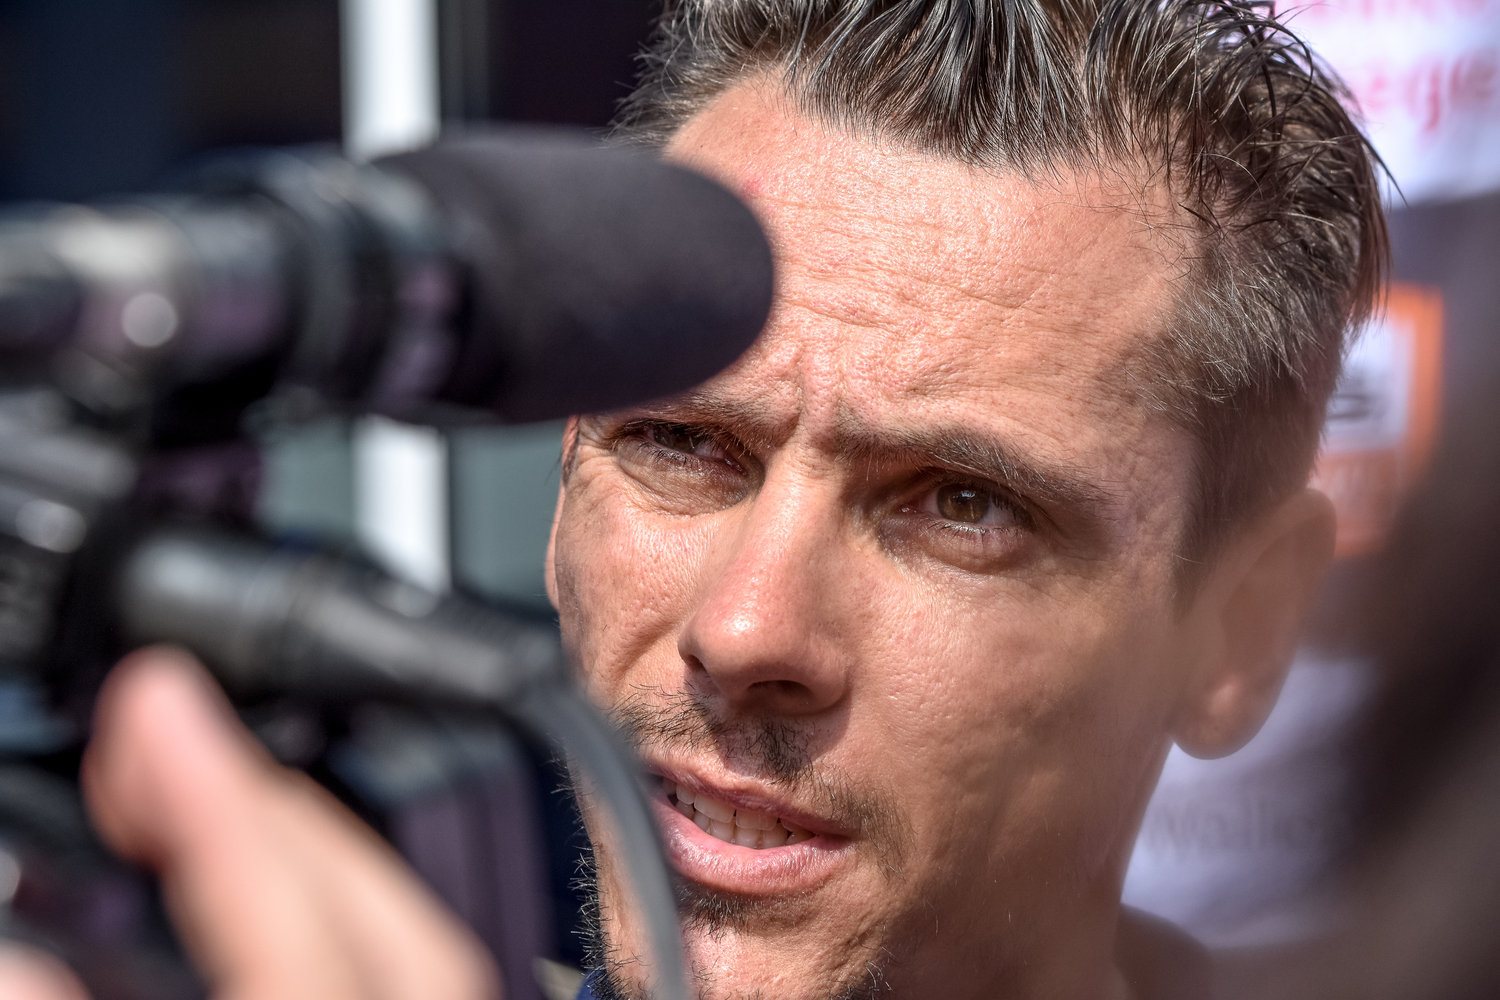 Philippe Gilbert among 3 guilty of assault, battery after training ride row